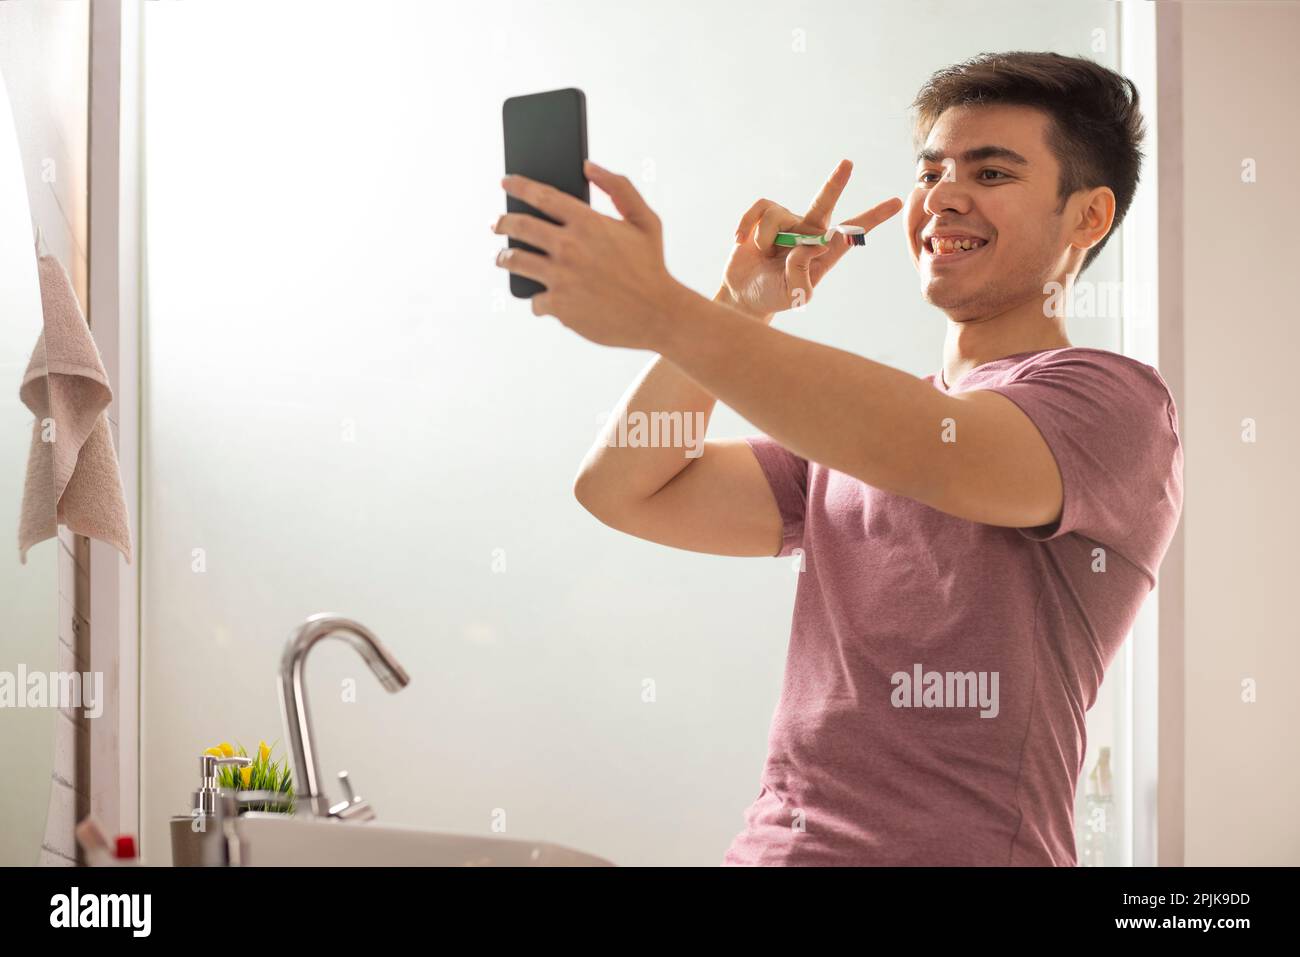 Young man gesturing on video call while brushing teeth in bathroom Stock Photo